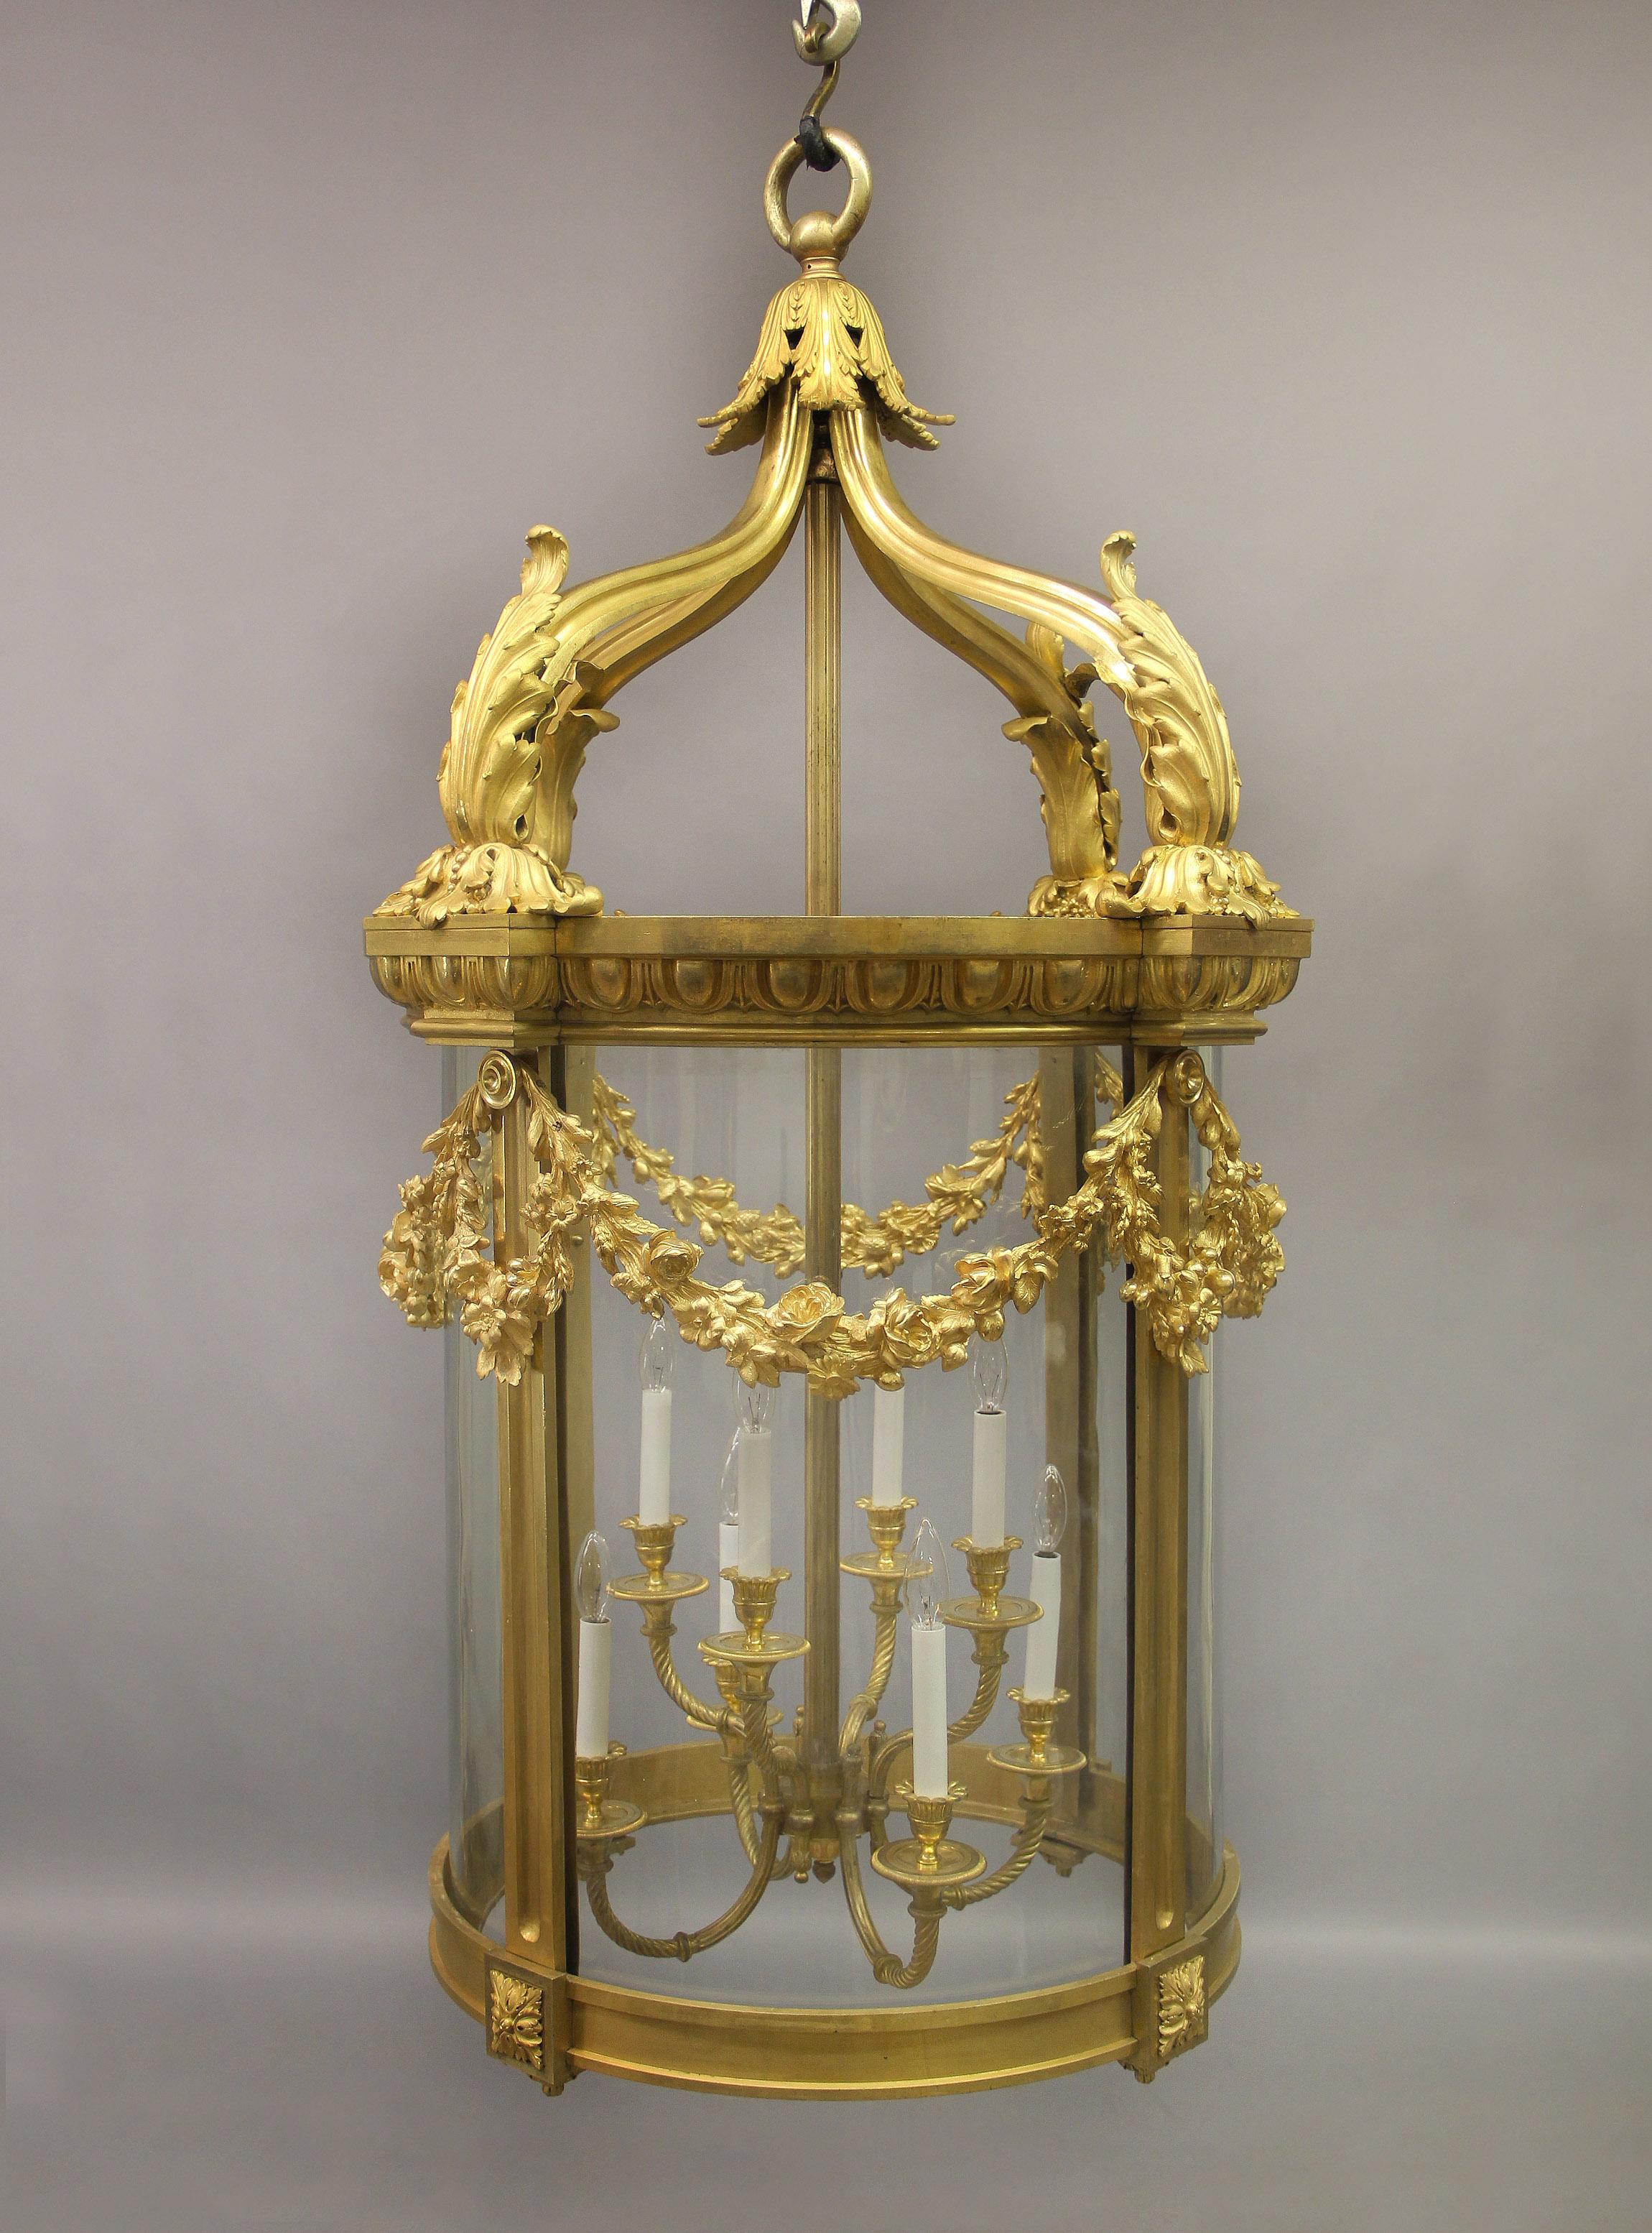 An exceptional late 19th century gilt bronze palatial eight light lantern

The large and important frame designed with a crowned top with acanthus leaves and berries, the body surrounded by wreaths and garlands with flowers and foliage that are